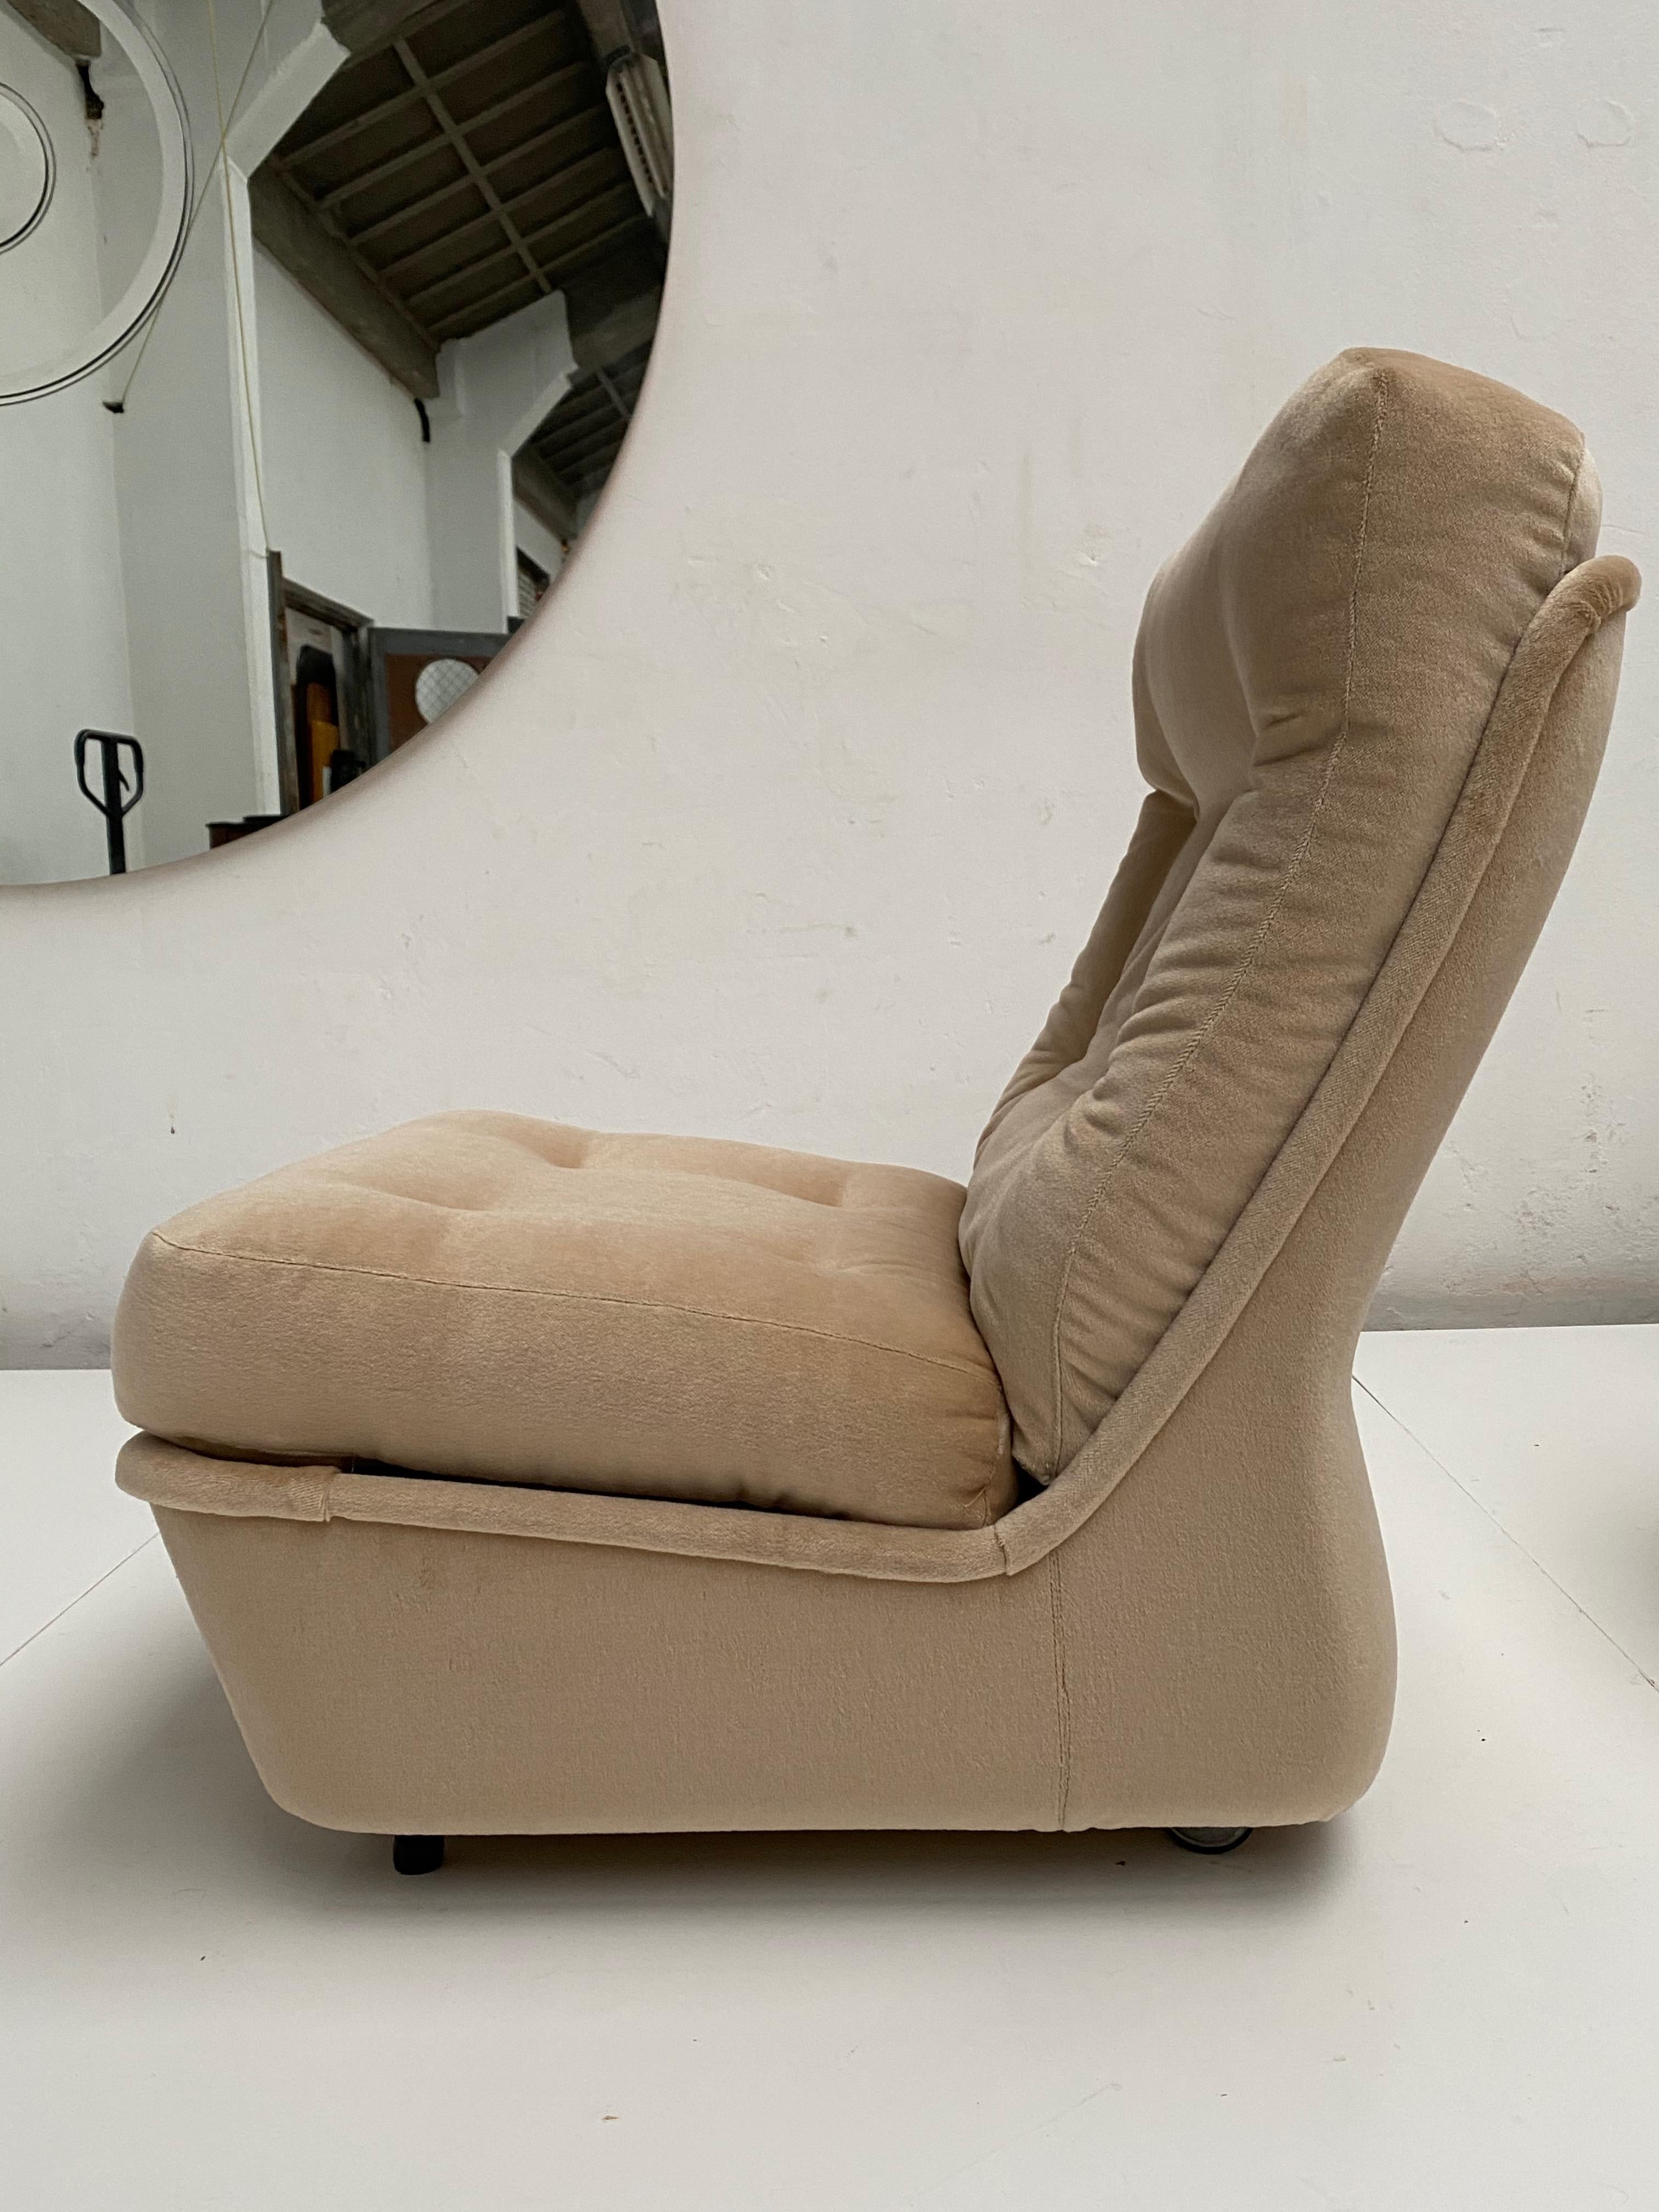 Molded Space Age Mohair “Orchidée” Lounge Chairs Michel Cadestin, Airborne, France 1968 For Sale